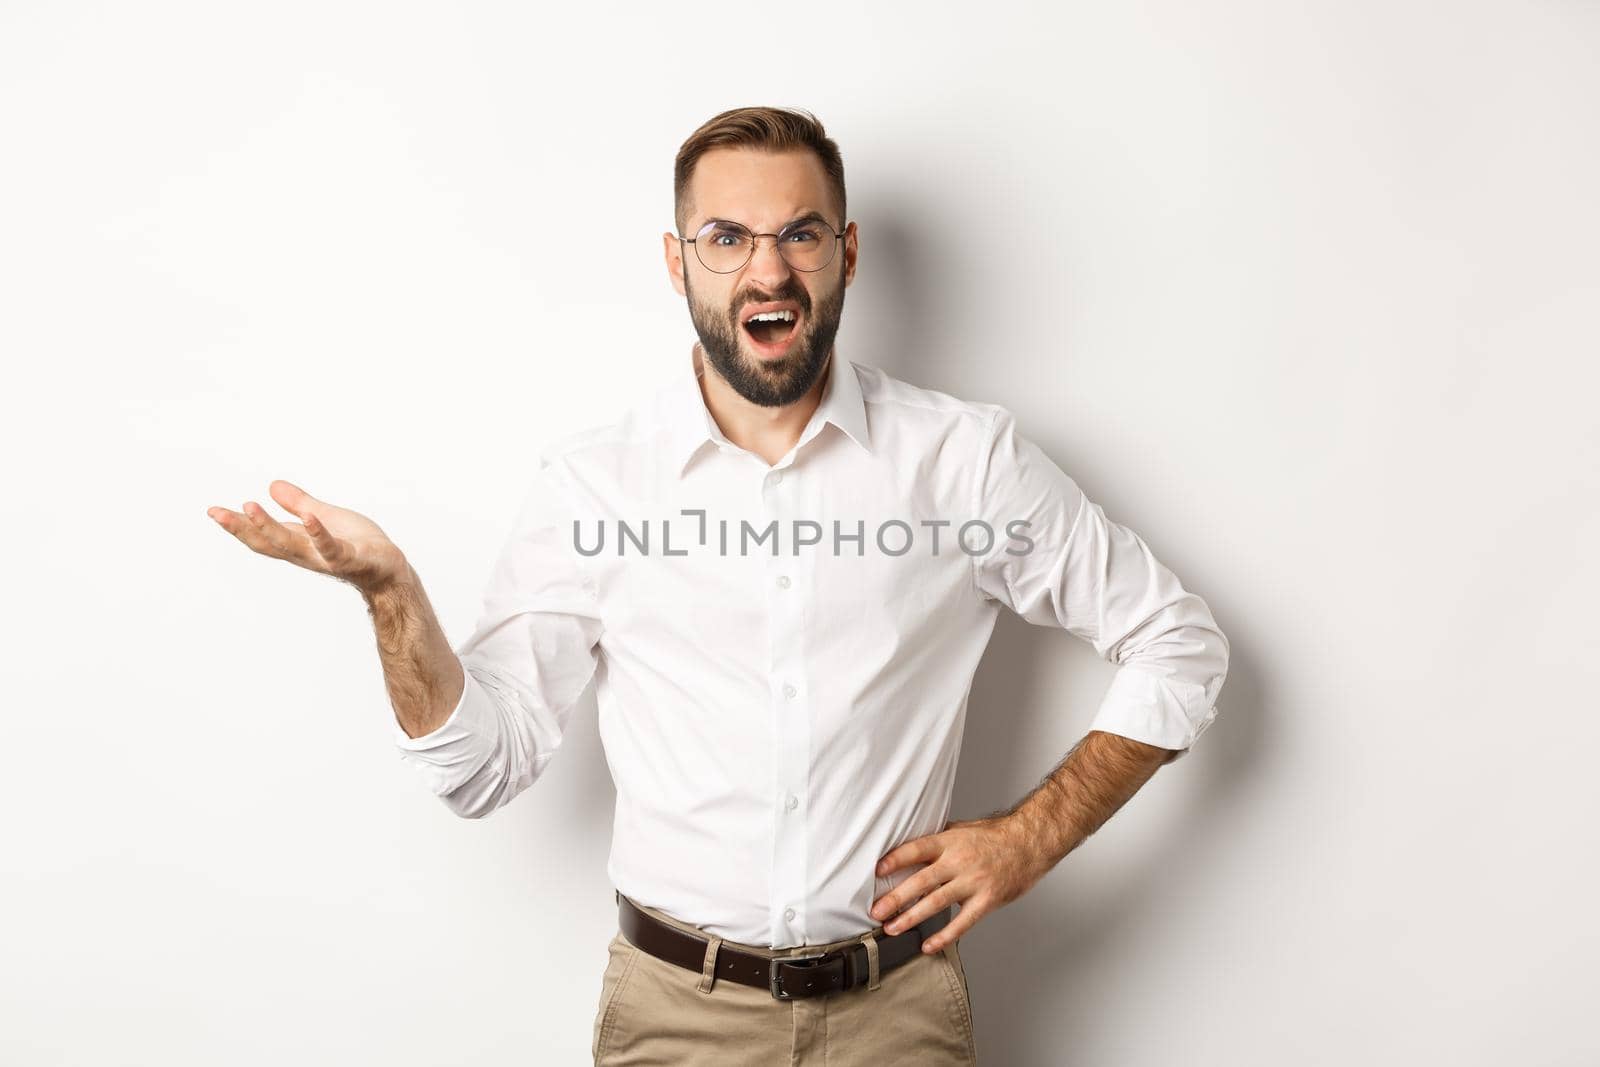 Frustrated office worker complaining, gesturing and looking disappointed, standing over white background.